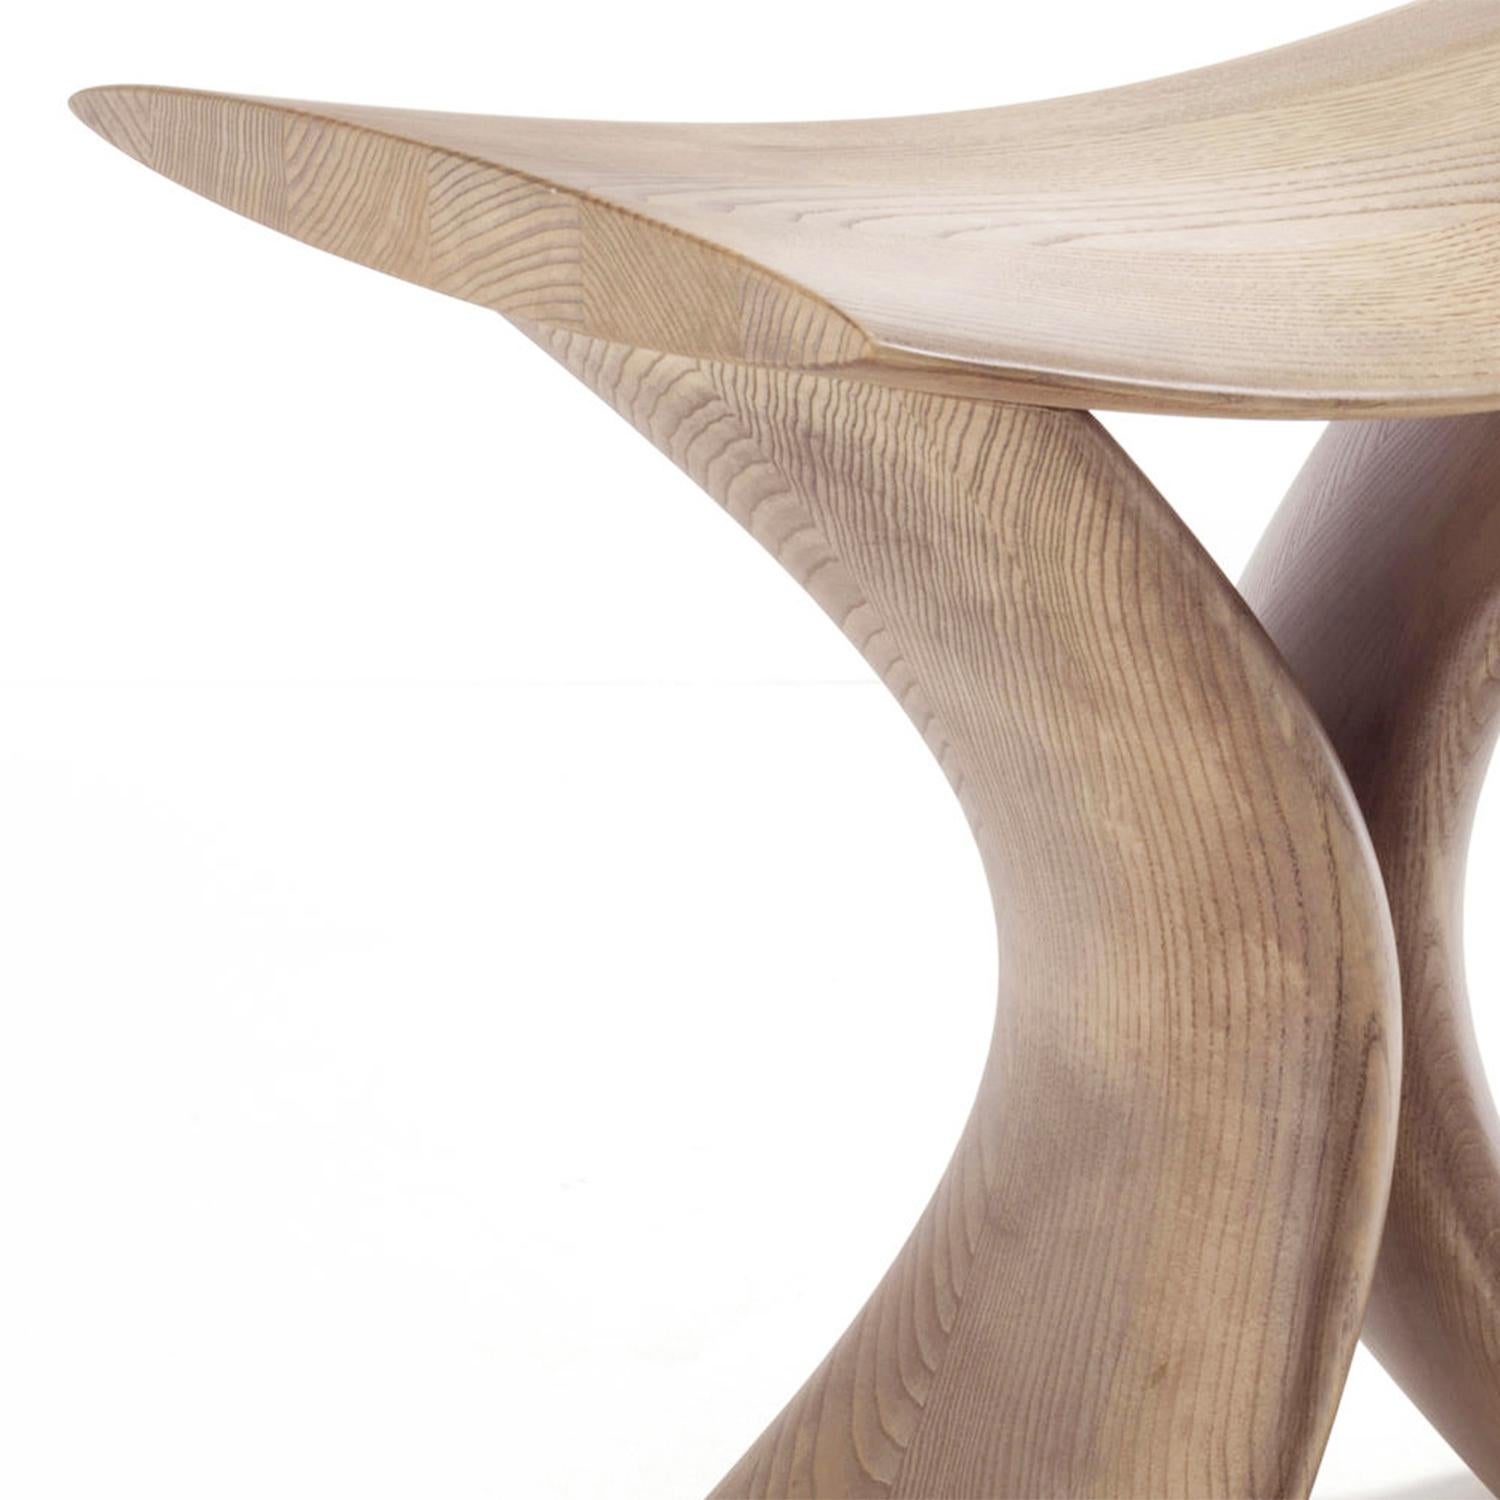 Hand-Crafted Aman Natura Stool For Sale